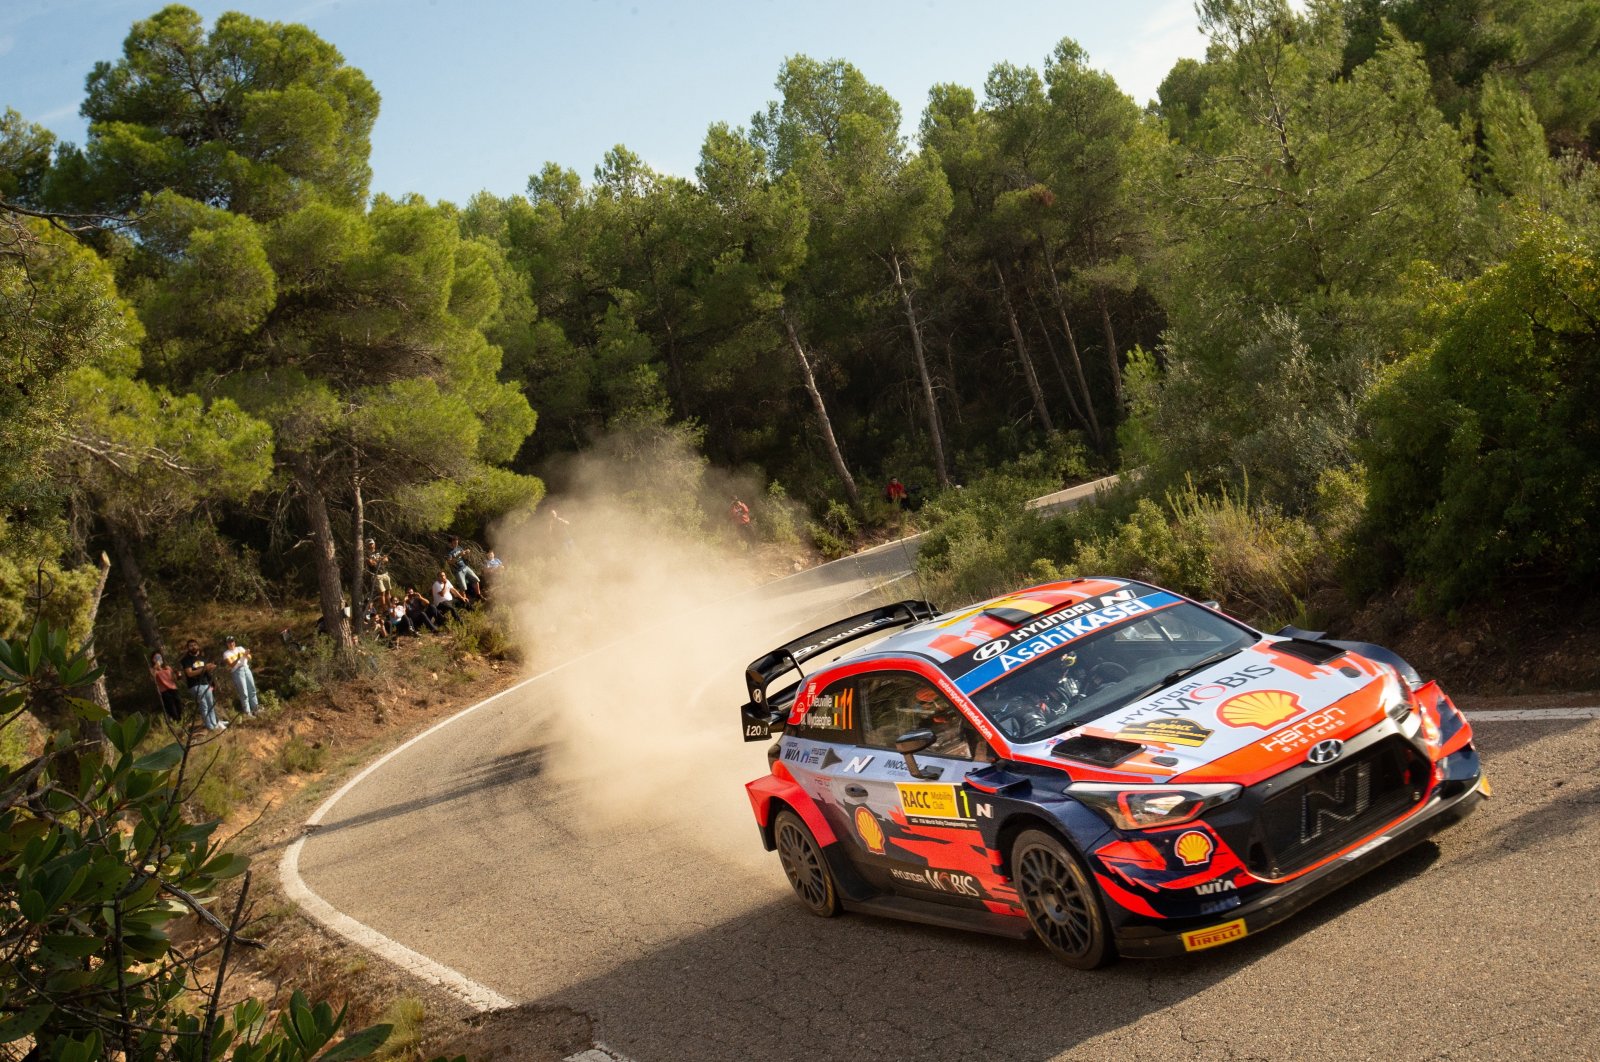 Belgian driver Thievy Neuville in his Hyundai i20 Coupe takes a corner on the second day of the WRC Rally of Spain in La Granadella, Lleida, Spain, Oct. 15, 2021. (EPA Photo)